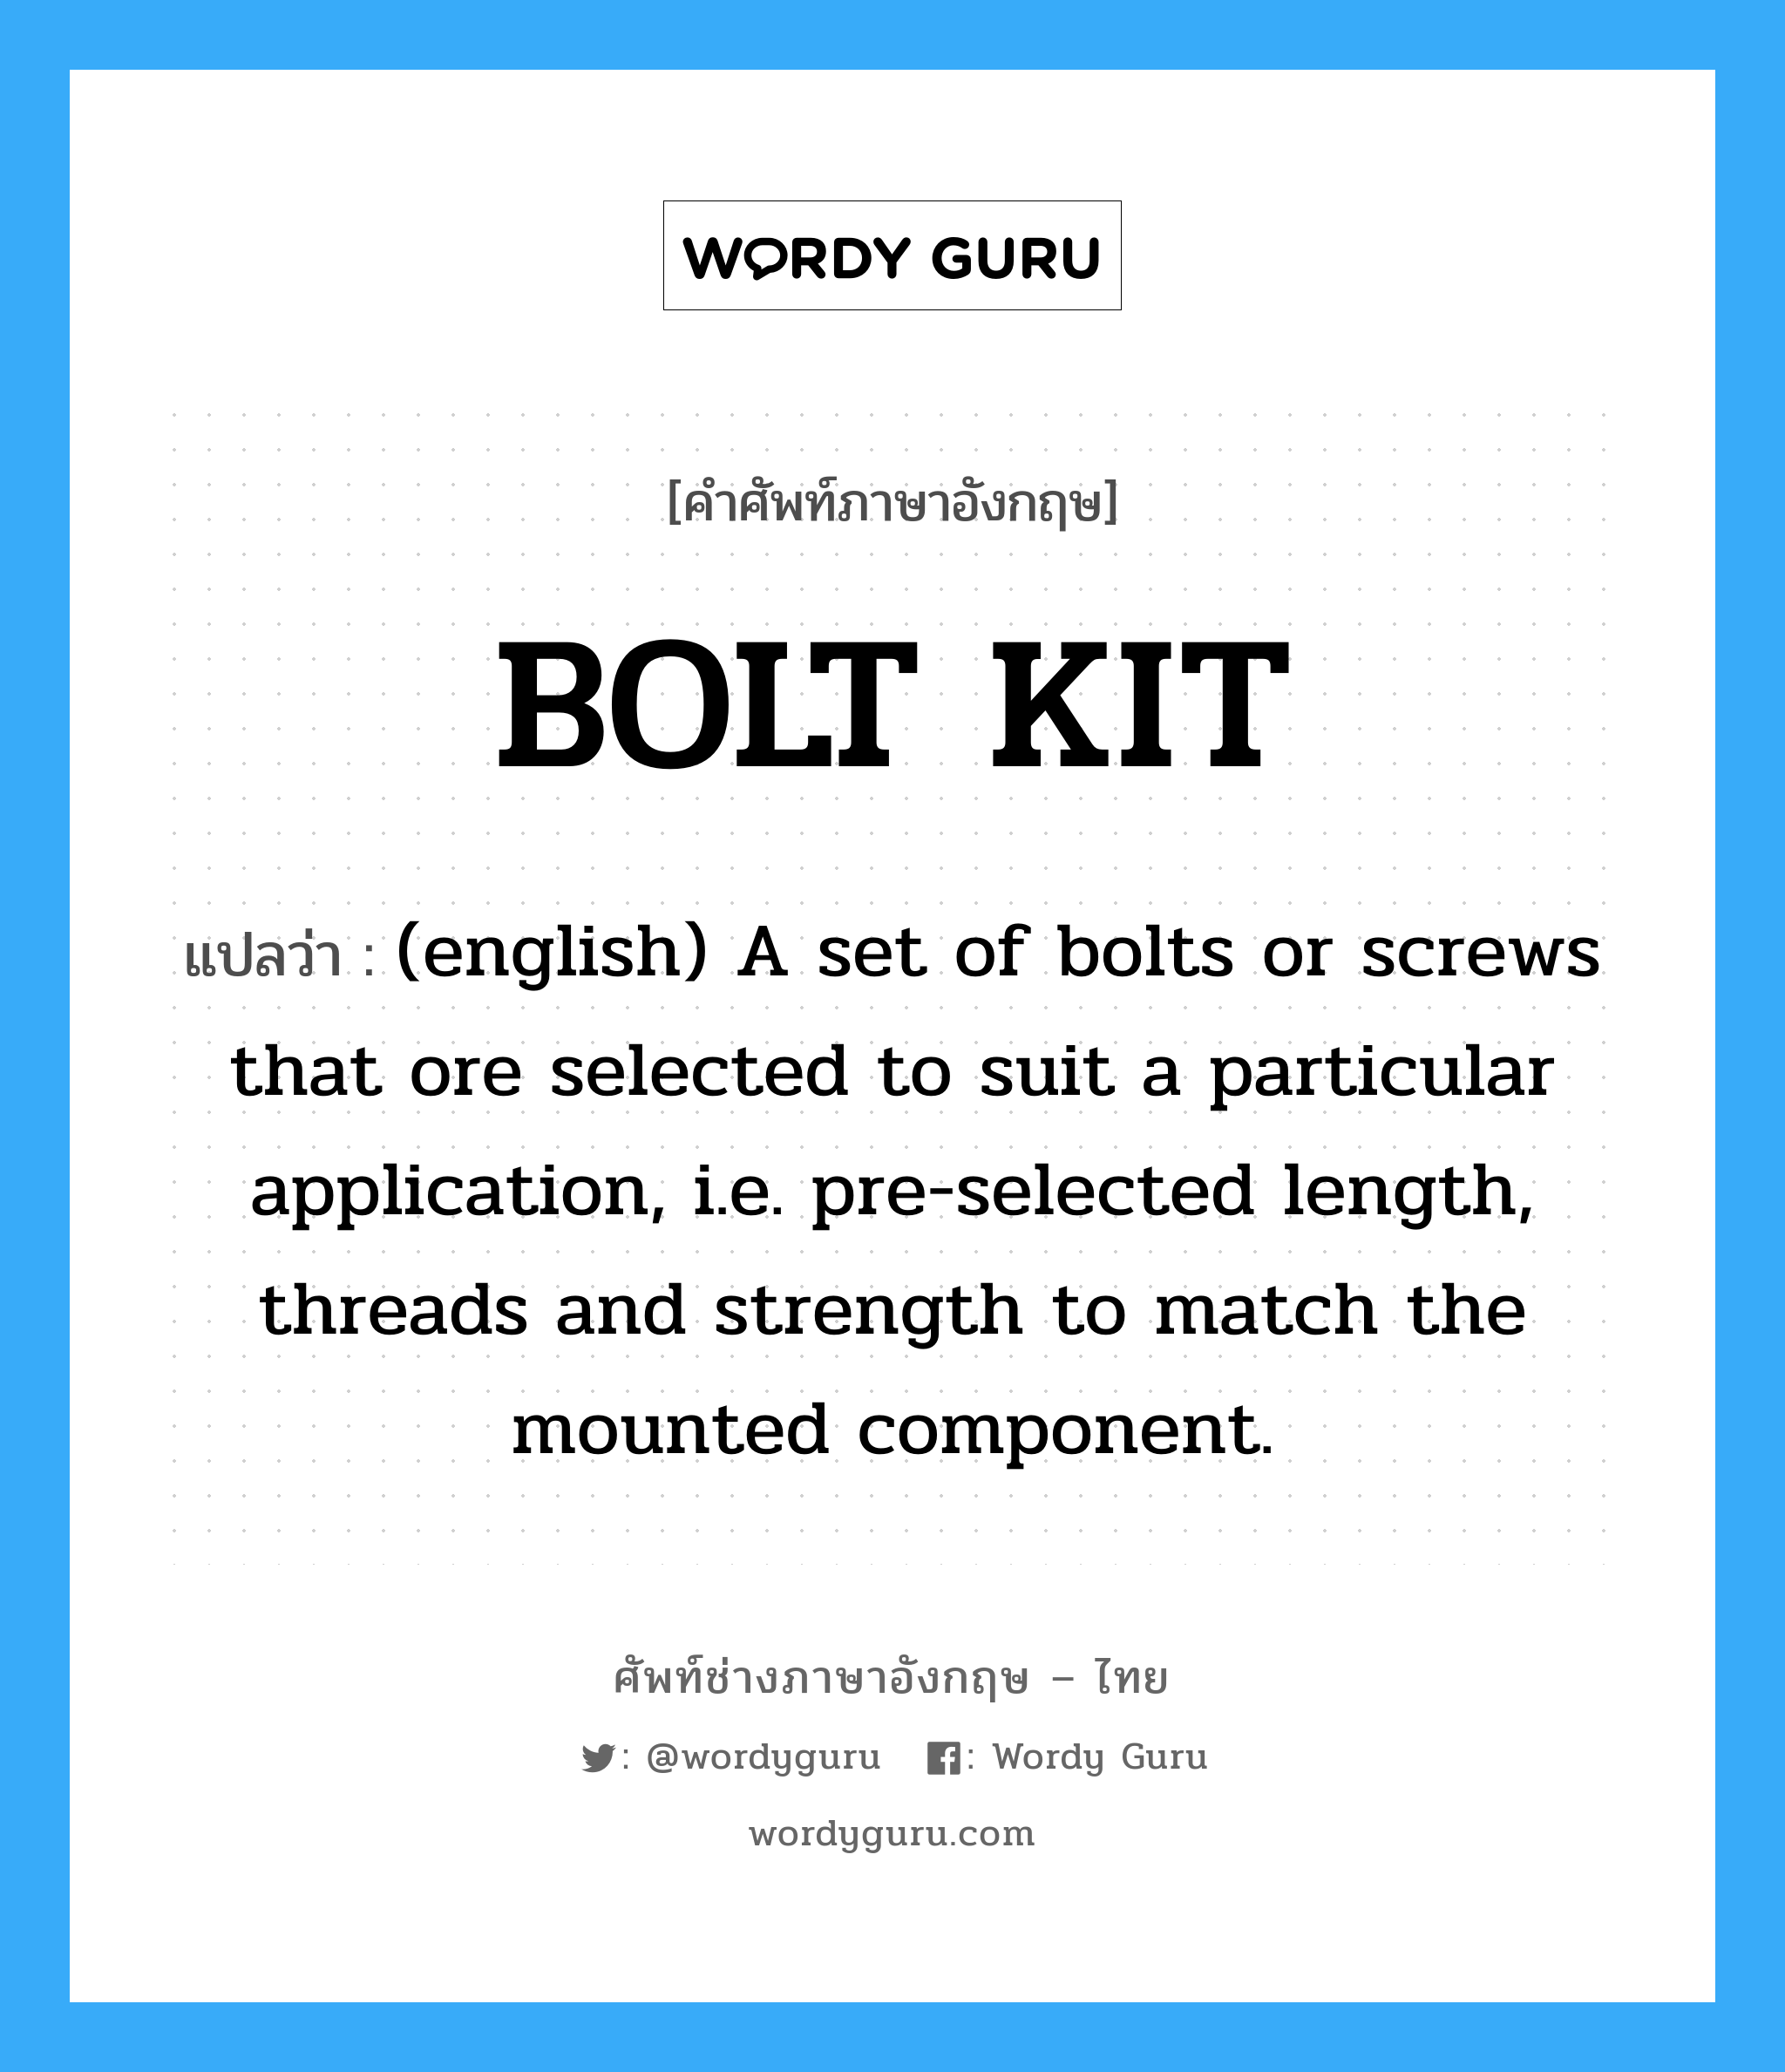 BOLT KIT แปลว่า?, คำศัพท์ช่างภาษาอังกฤษ - ไทย BOLT KIT คำศัพท์ภาษาอังกฤษ BOLT KIT แปลว่า (english) A set of bolts or screws that ore selected to suit a particular application, i.e. pre-selected length, threads and strength to match the mounted component.